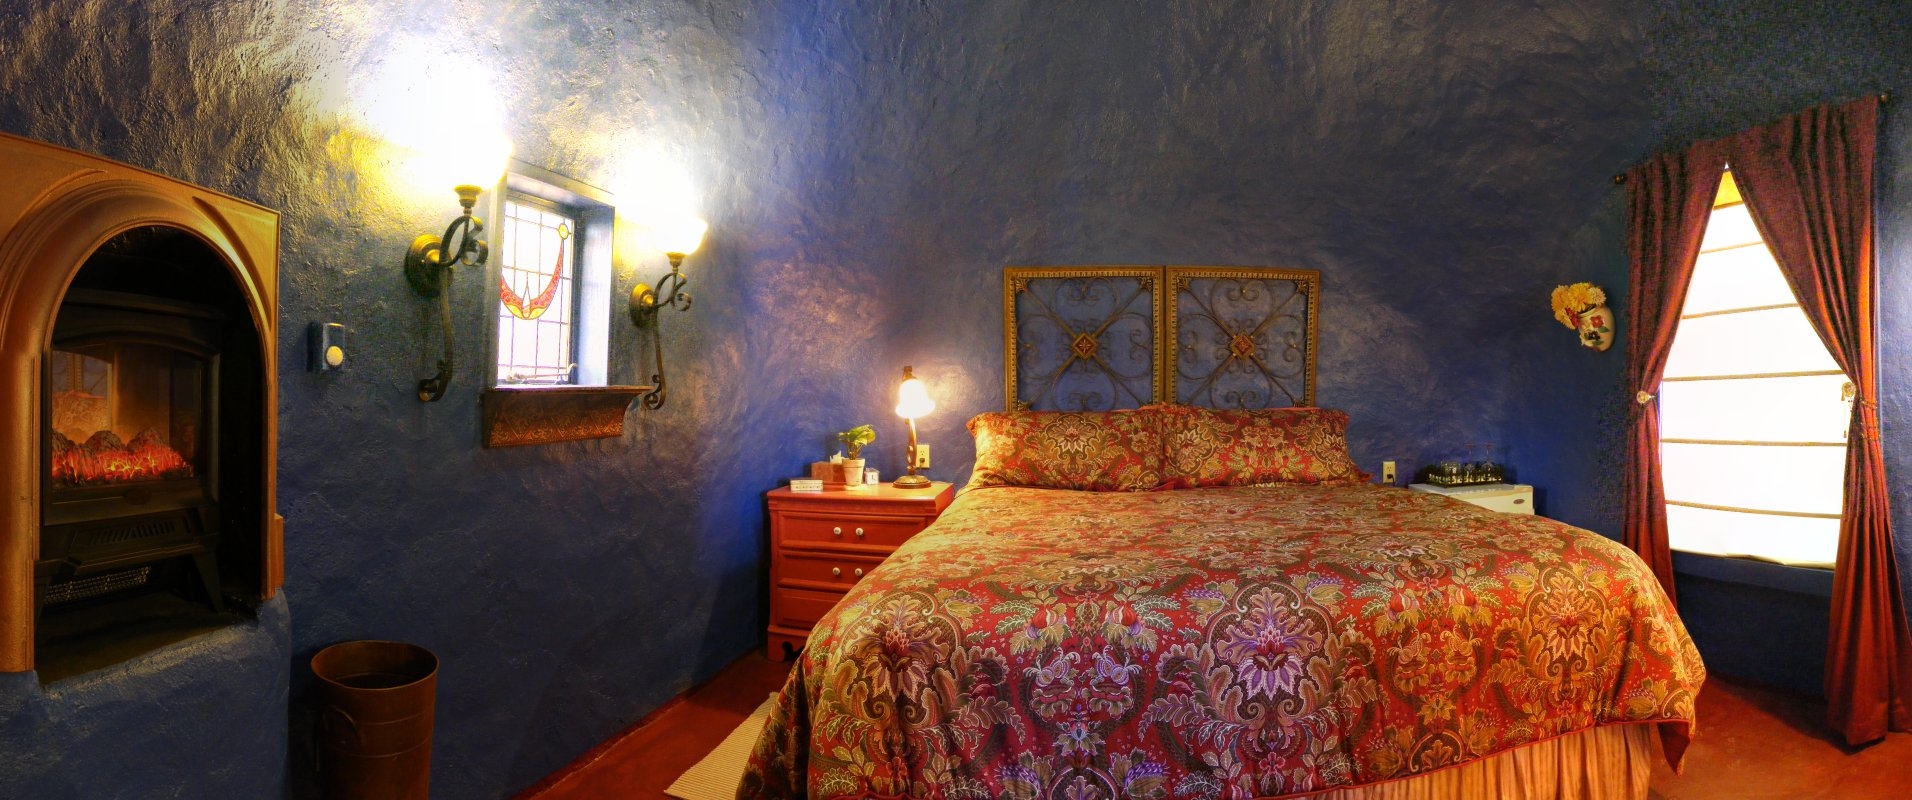 Sleep under the gorgeous domed ceiling in super-comfortable king sized bed in the Sapphire Room